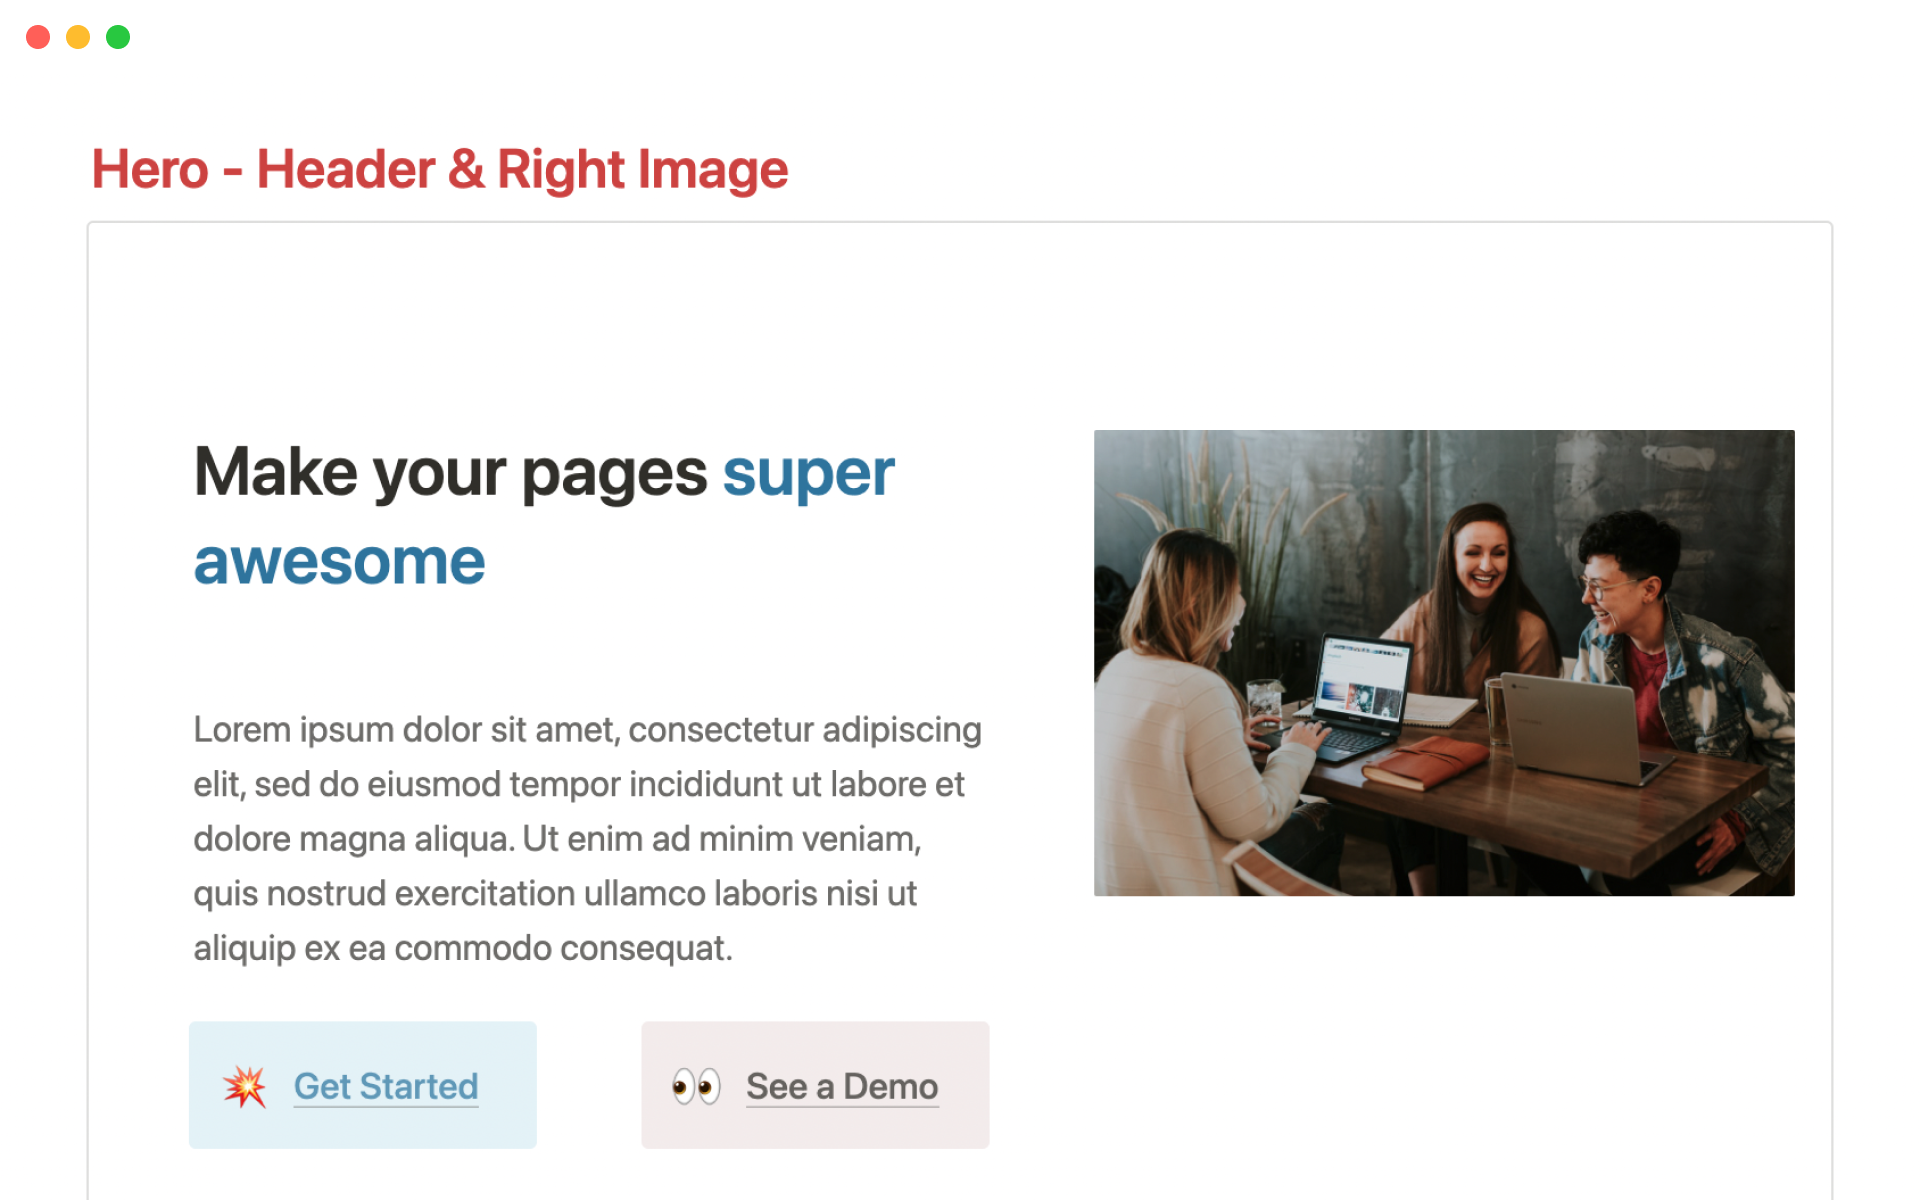 Easily create simple landing pages, portfolios, product pages, and more.